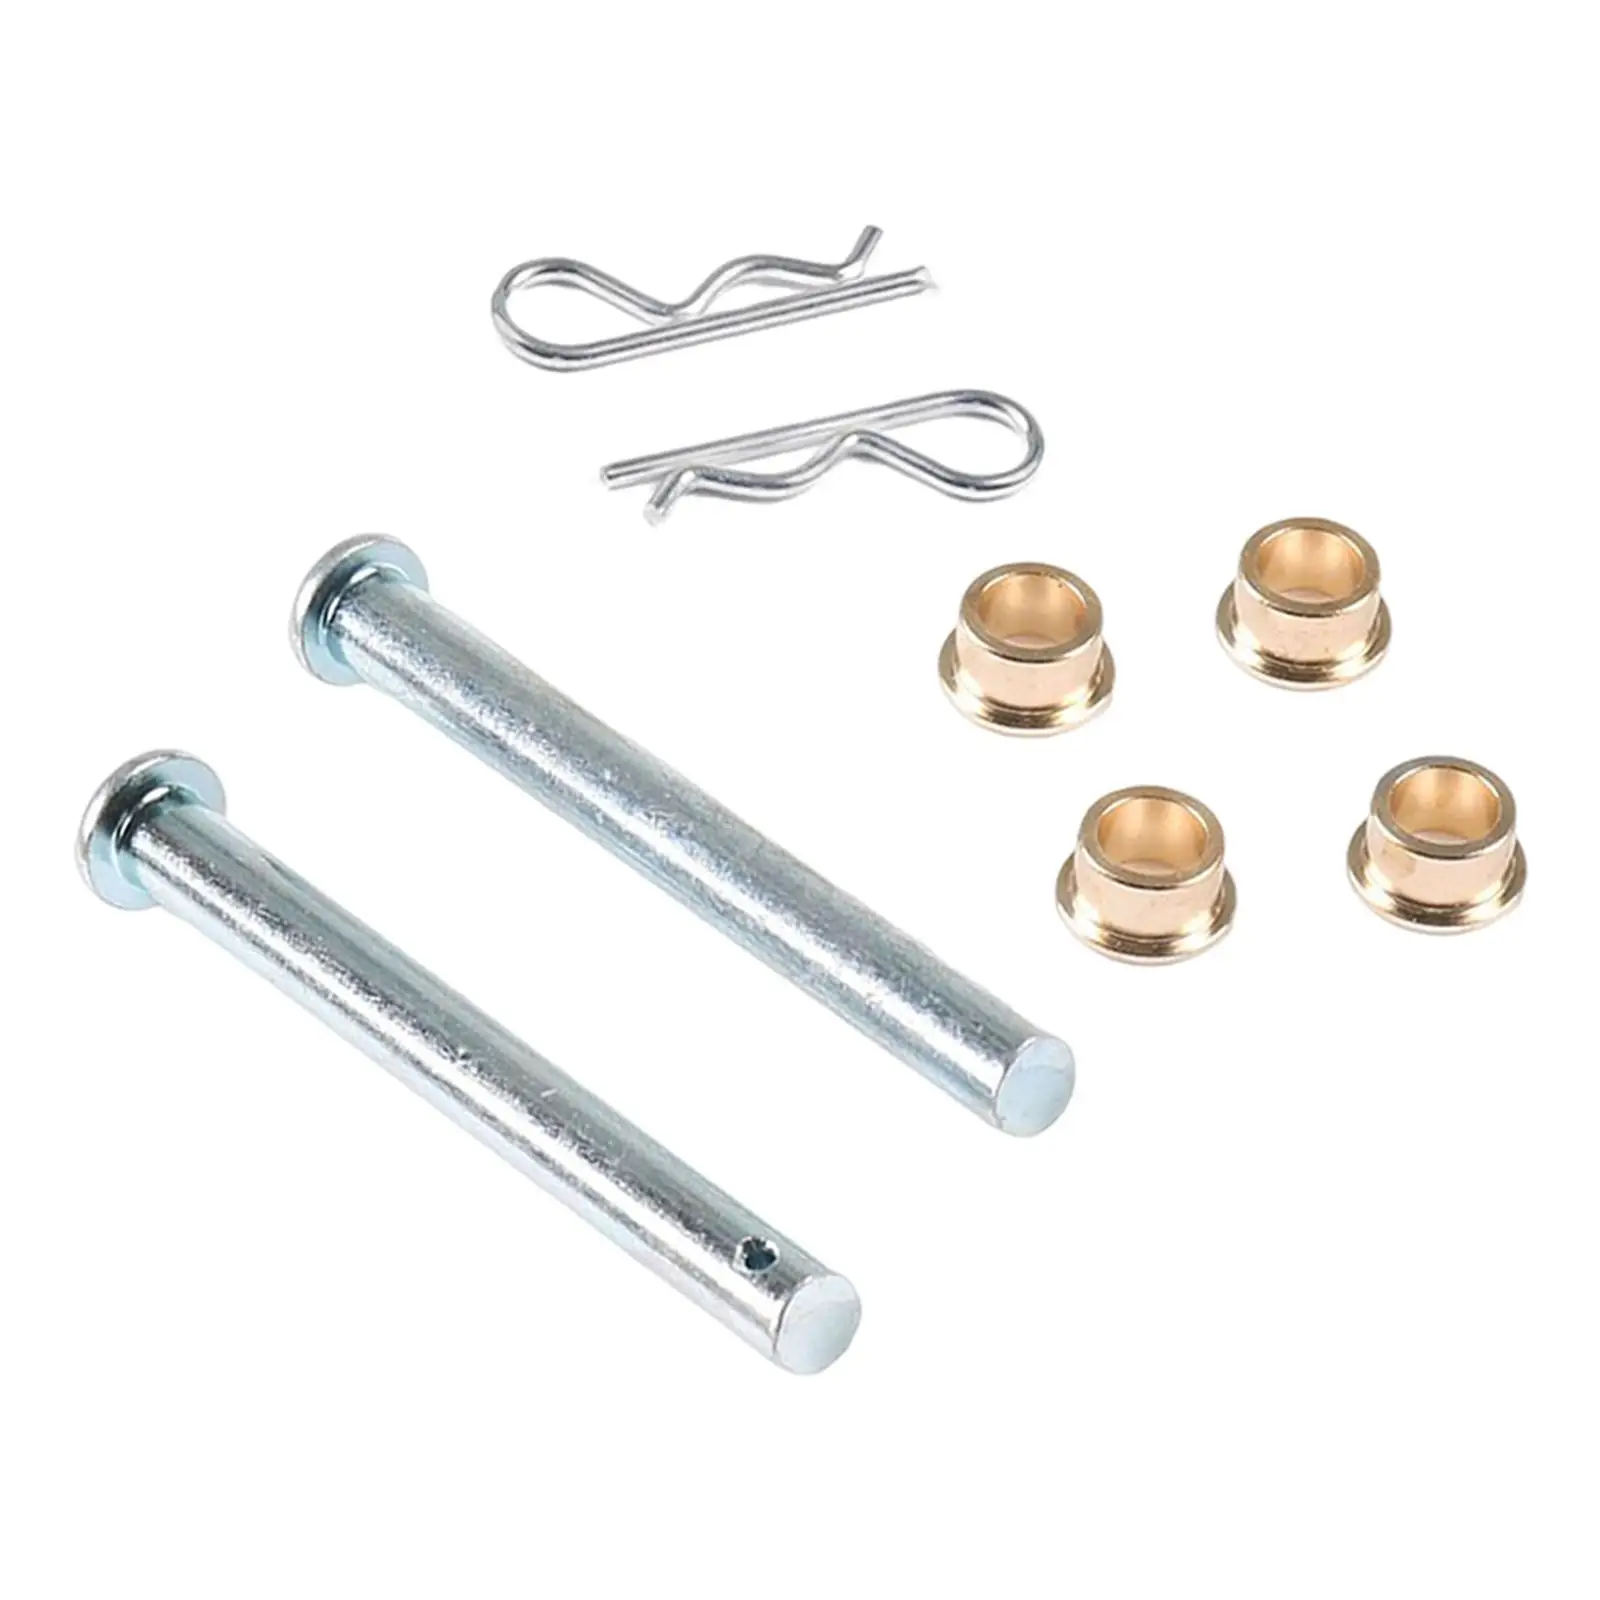 8 Pieces Vehicle Door Hinge Pins Kit with Bushings Replace for  